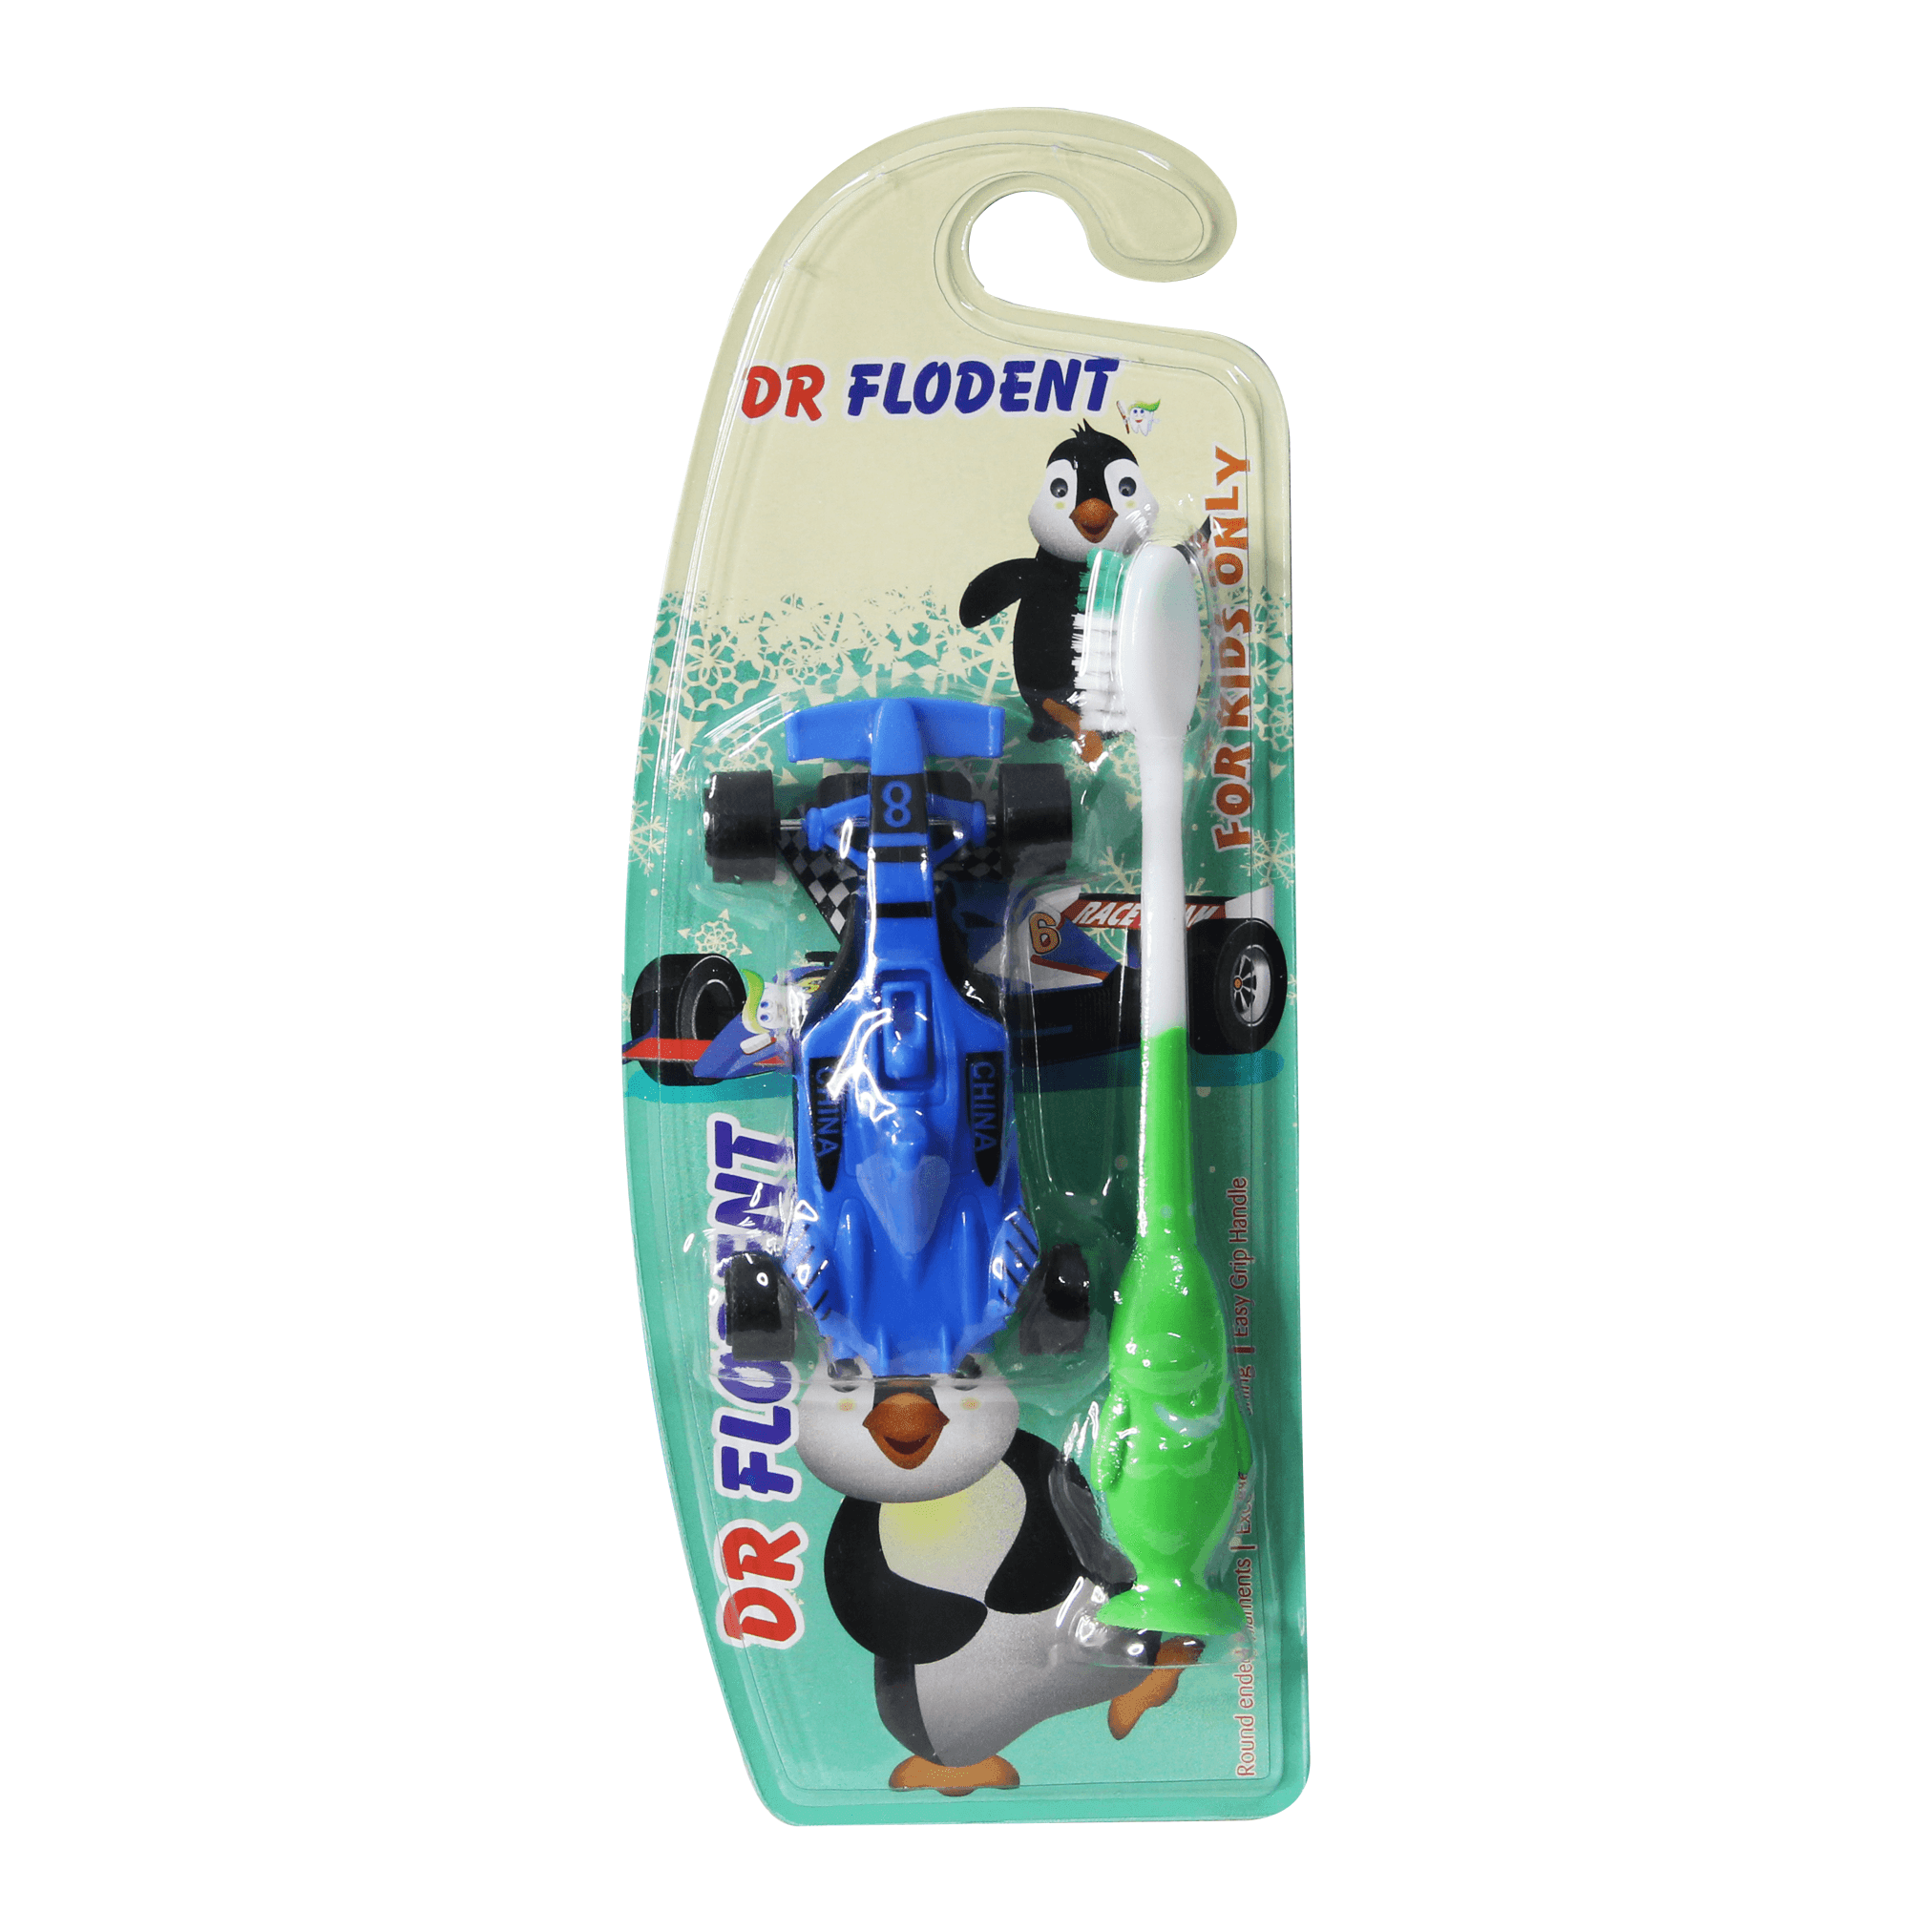 Dr Flodent Kids Toothbrush Extra Soft With Car Toy - BumbleToys - 2-4 Years, 5-7 Years, Baby Saftey & Health, Boys, Girls, Toothbrush